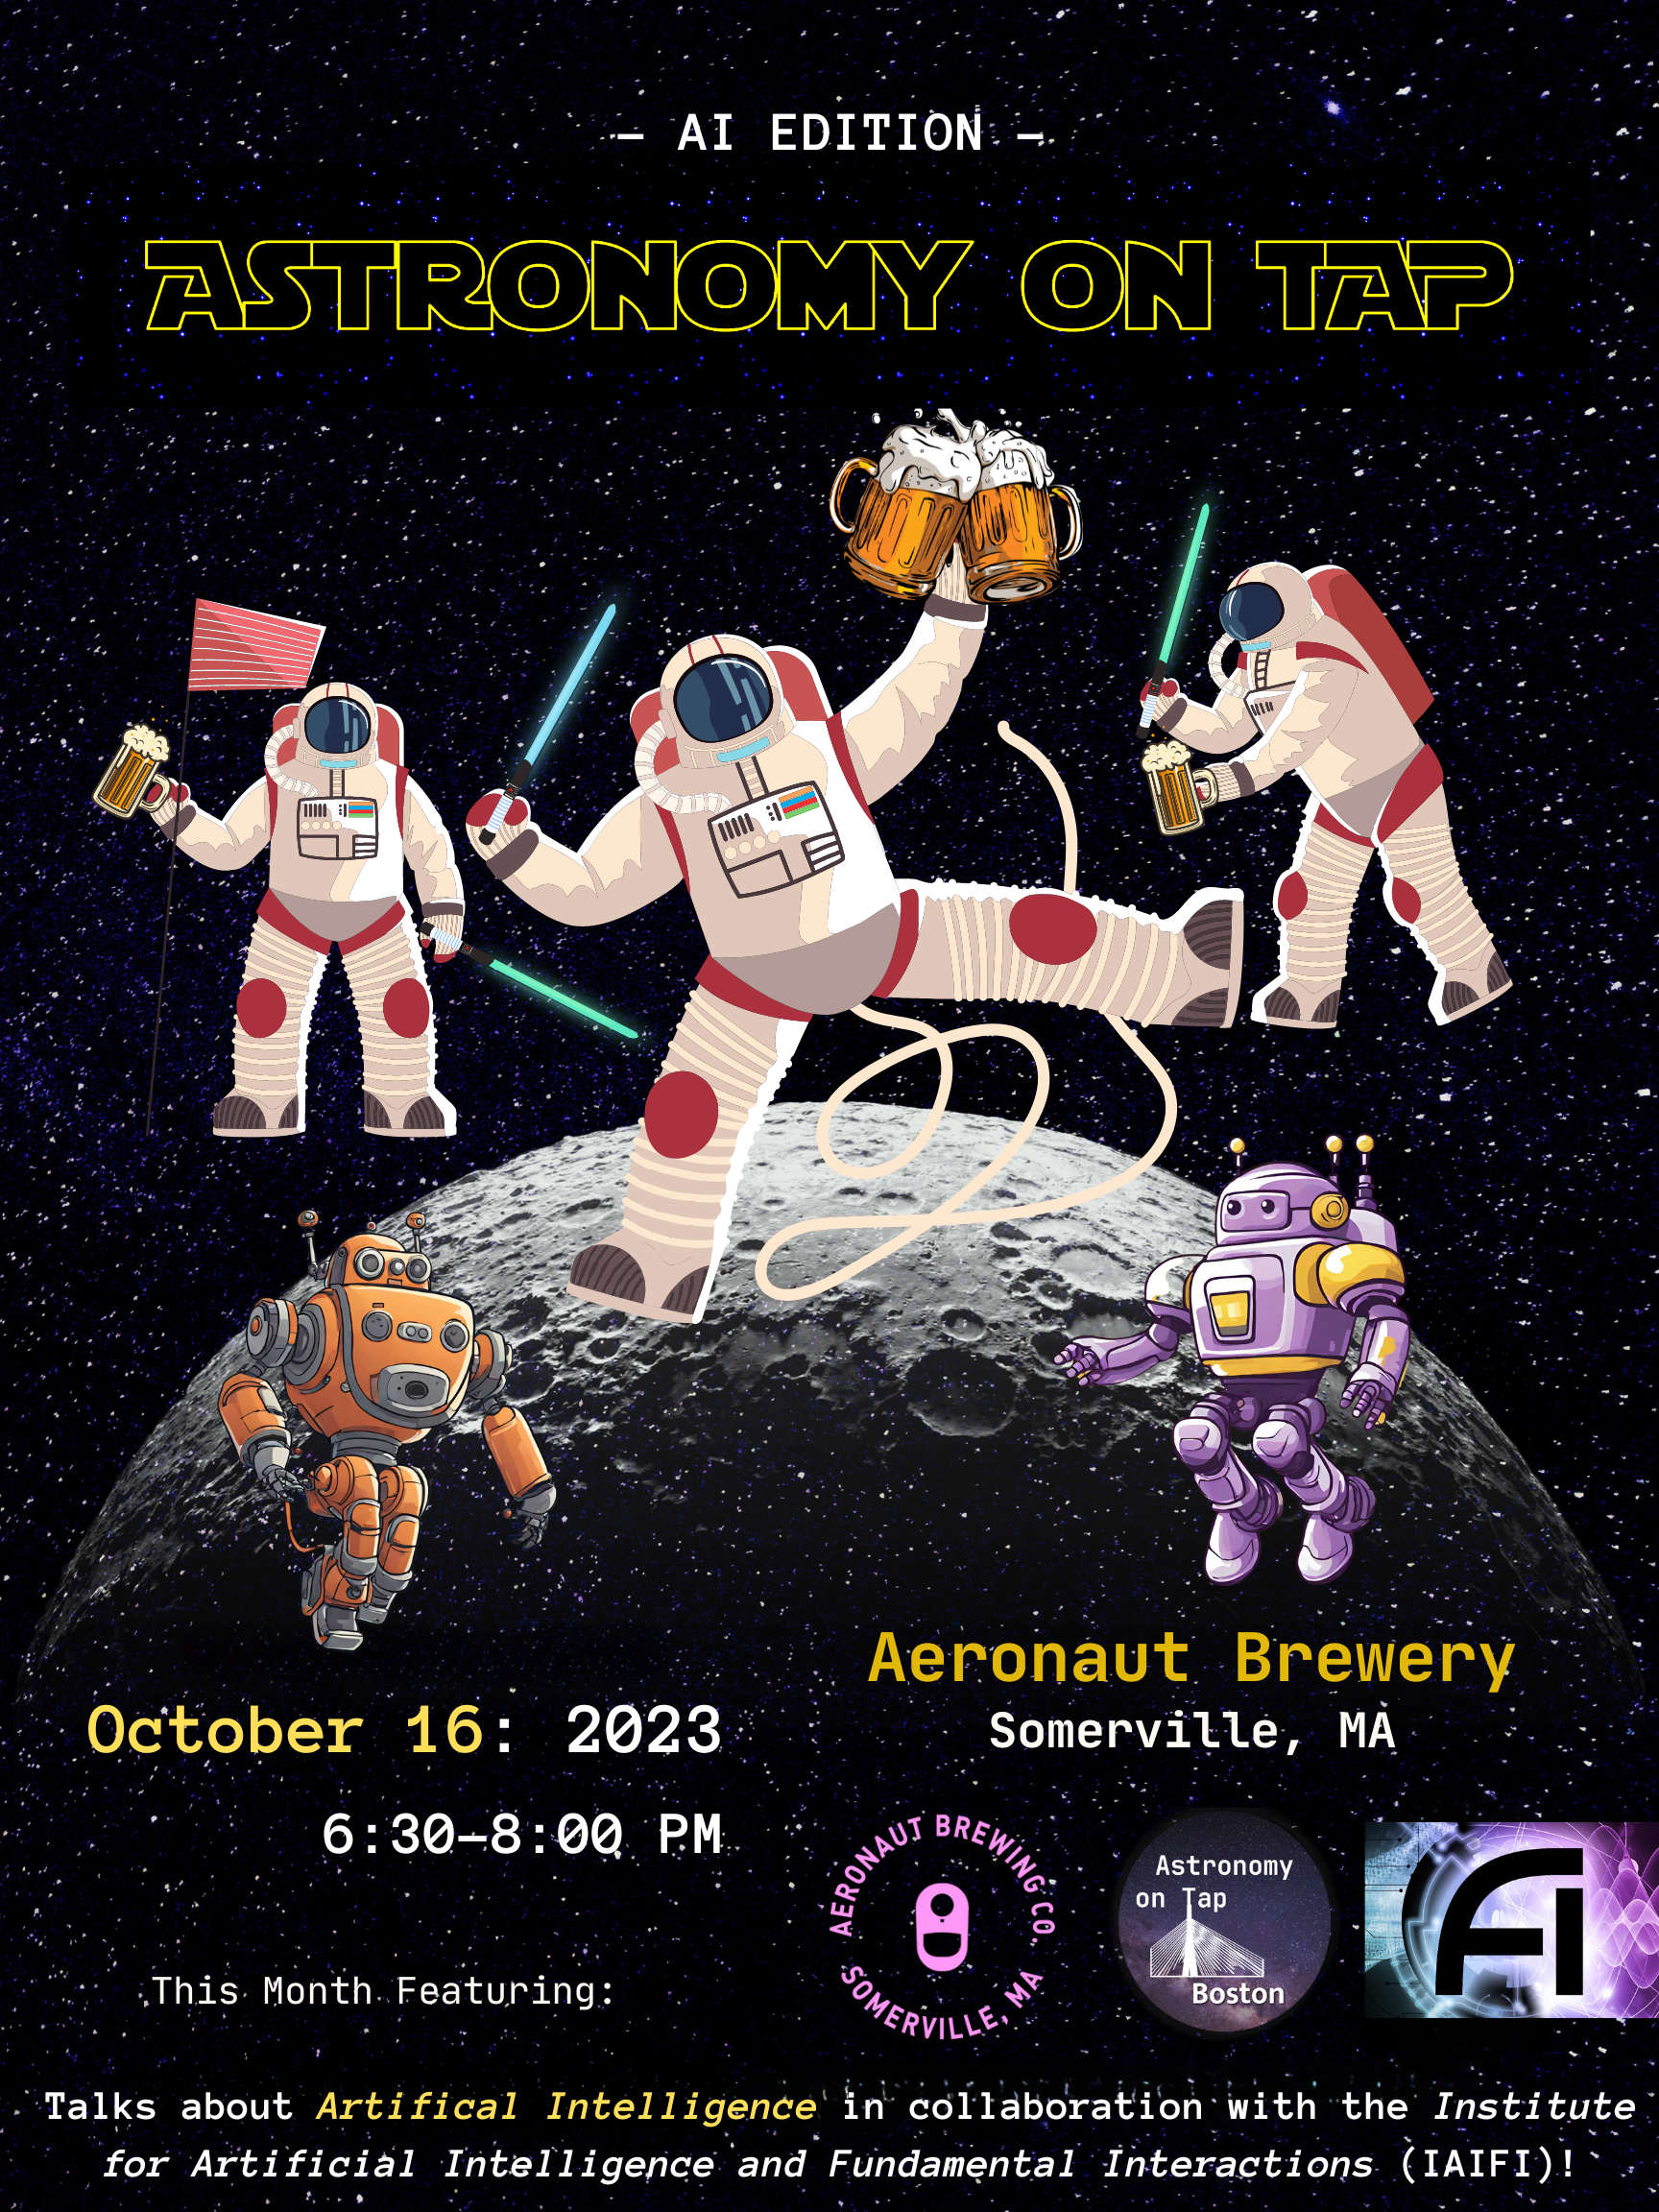 Cartoon astronauts with beers and lightsabers in front of a background with the moon and stars. Astronomy on Tap, October 16, 2023. 6:30-8pm. Aeronaut Brewing Co., Astronomy on Tap, and IAIFI logos in bottom right corner.